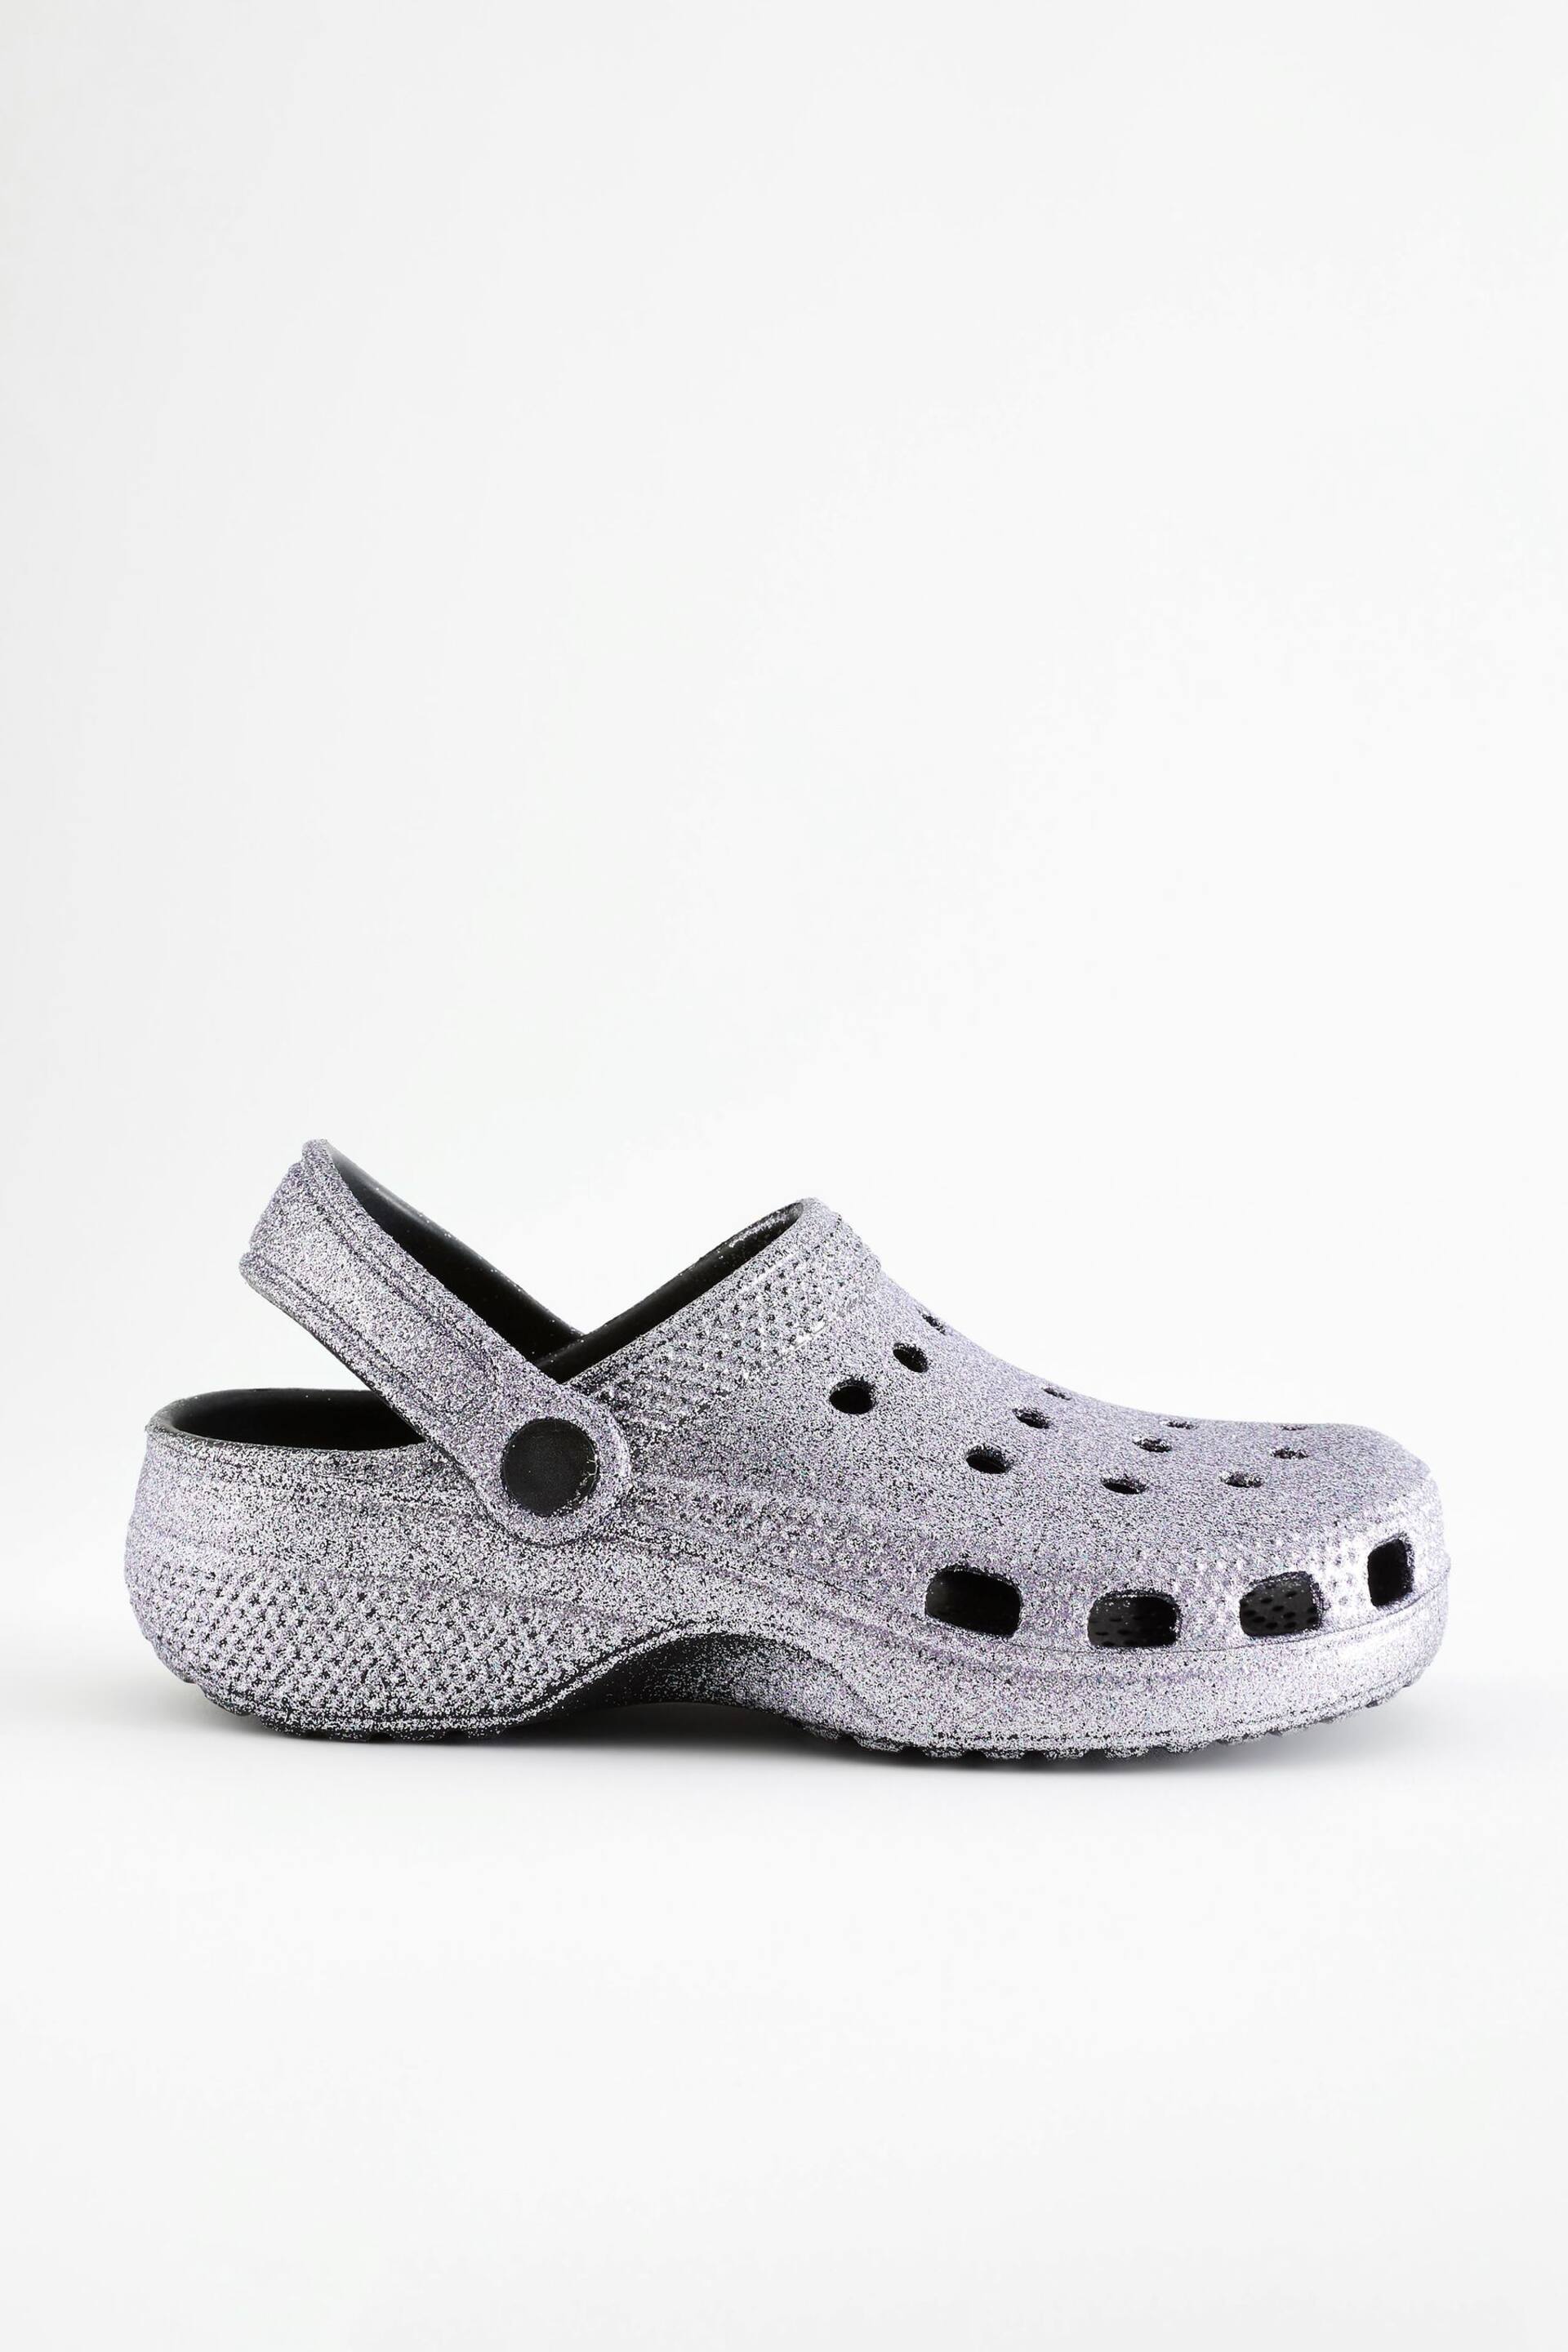 Silver Glitter Clogs - Image 7 of 10